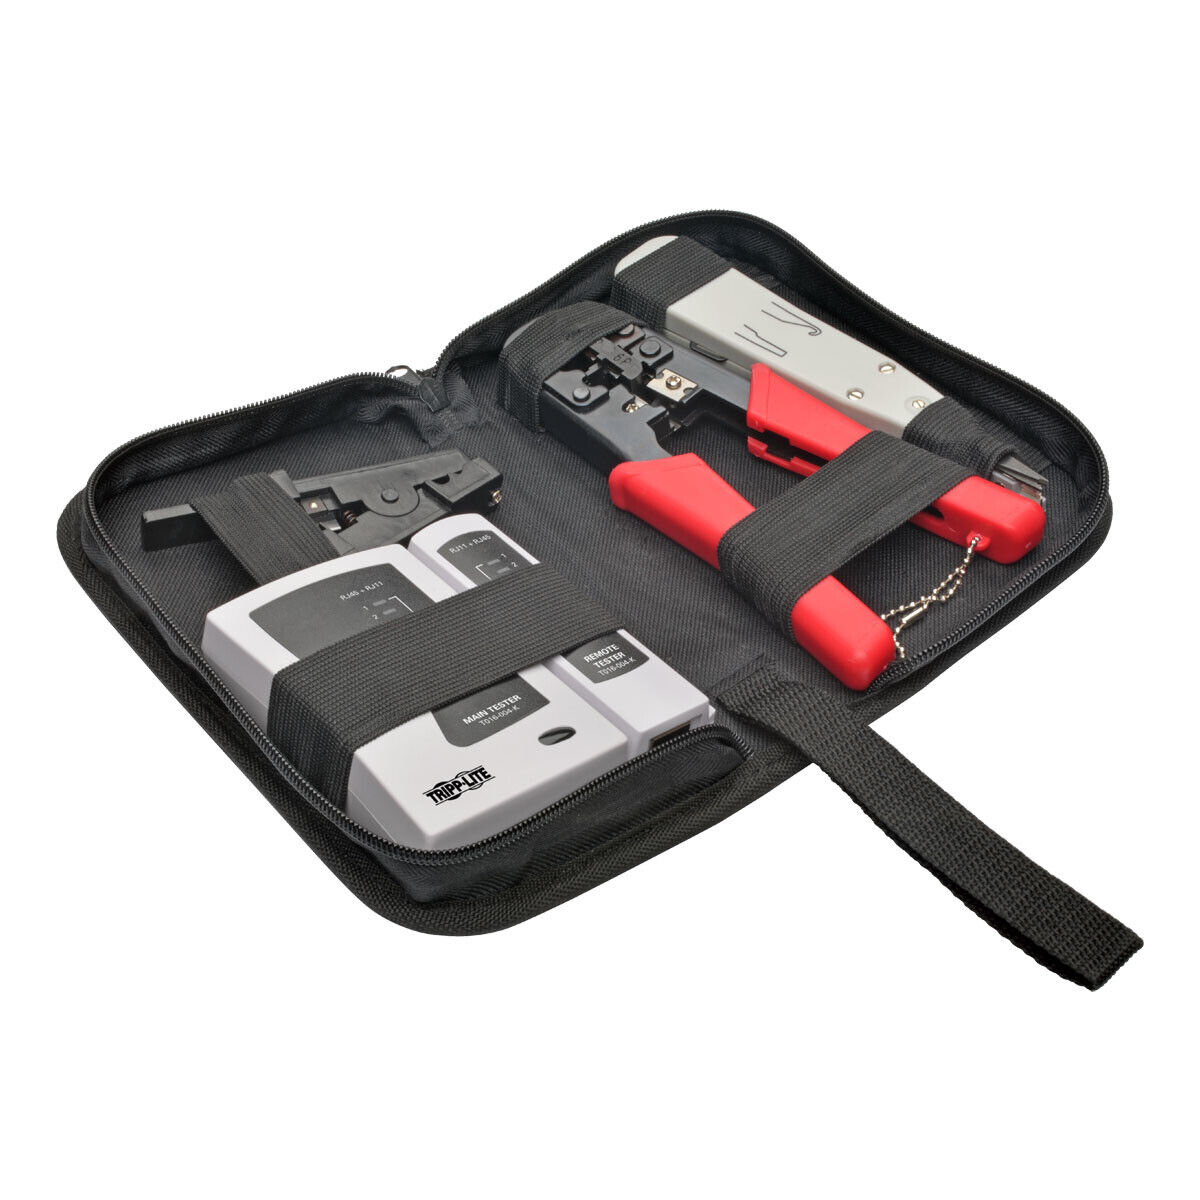 Tripp-Lit-New-T016-004-K _ 4 PC NETWORK INSTALLER TOOL KIT with CARRYI